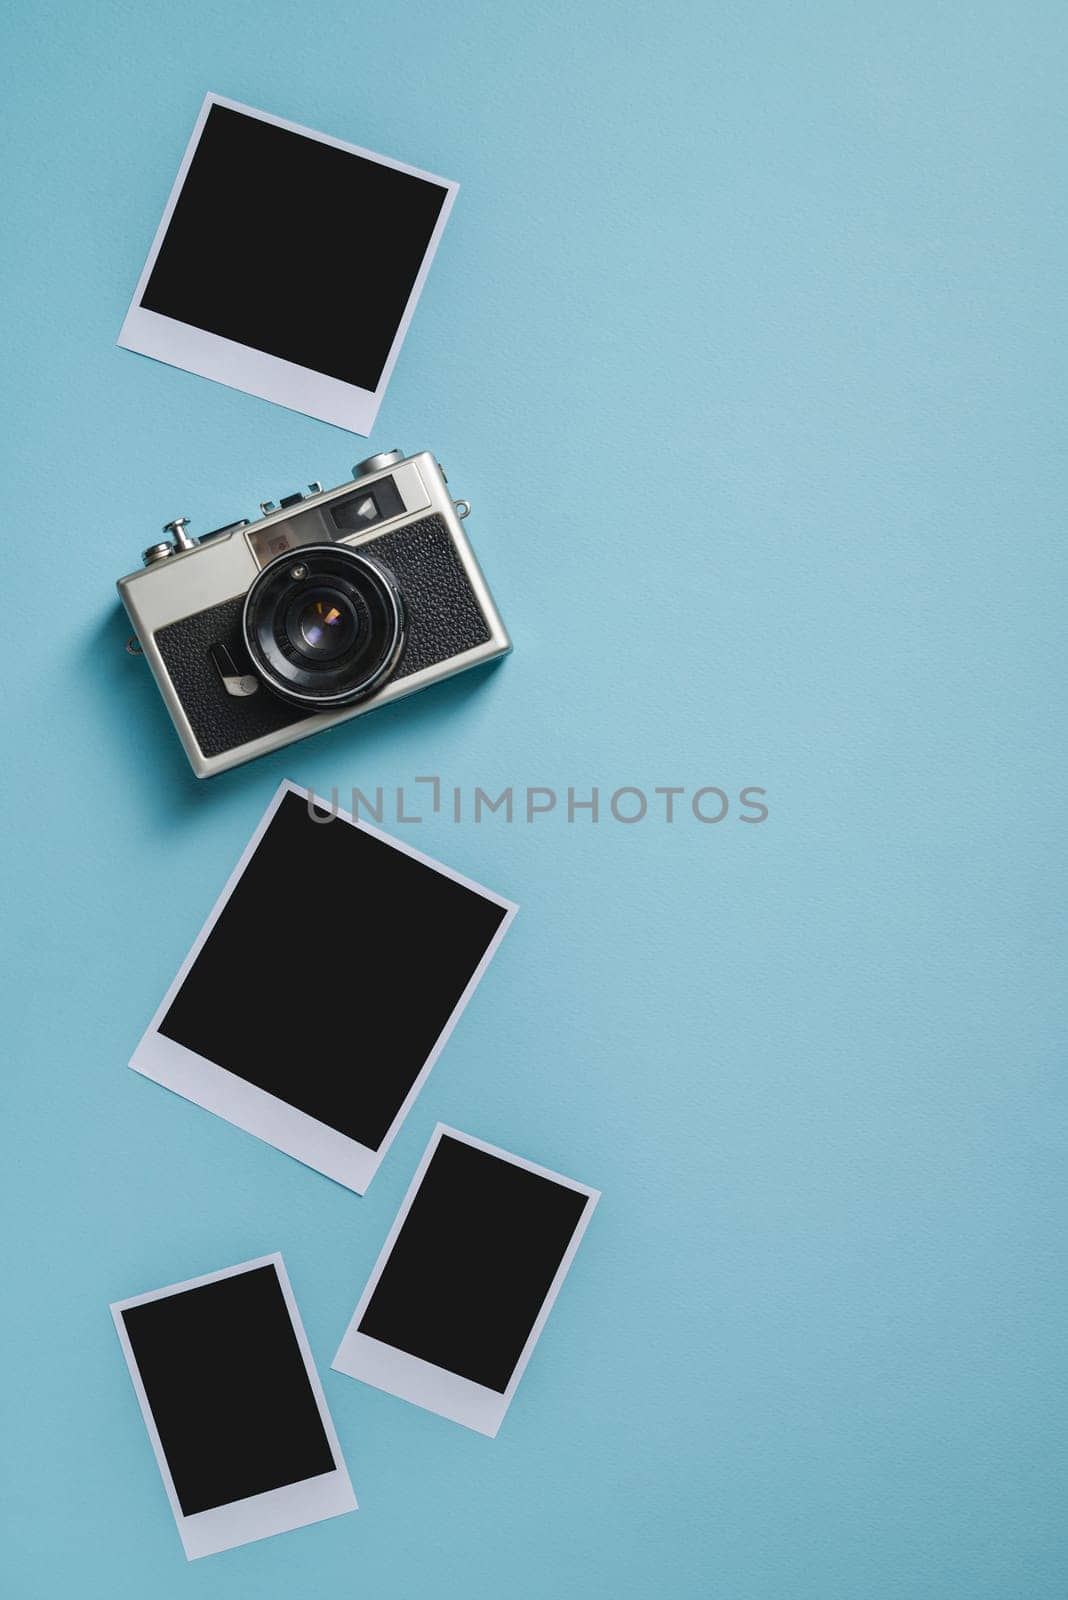 Vintage photo camera and empty photo frames on blue background. Travel moment concept